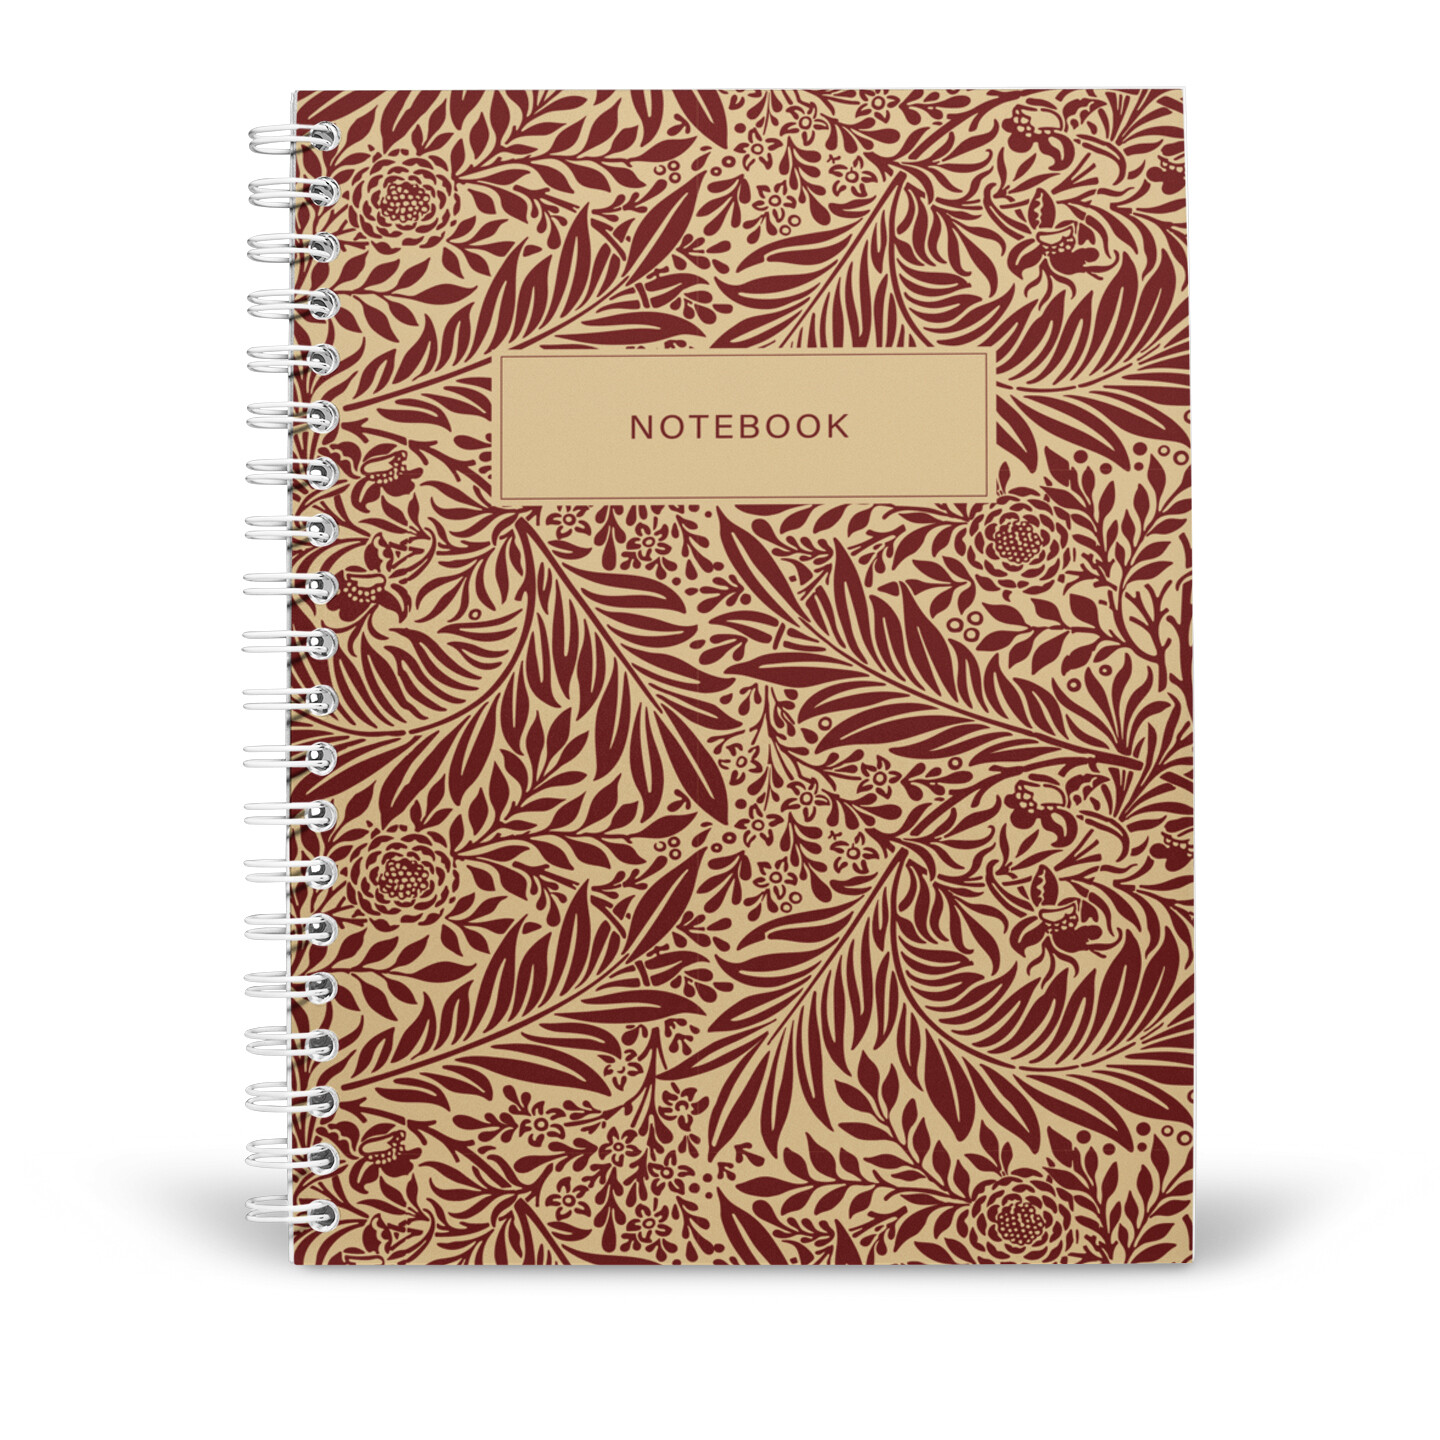 Notebook Inspired By William Morris - Larkspur - Red